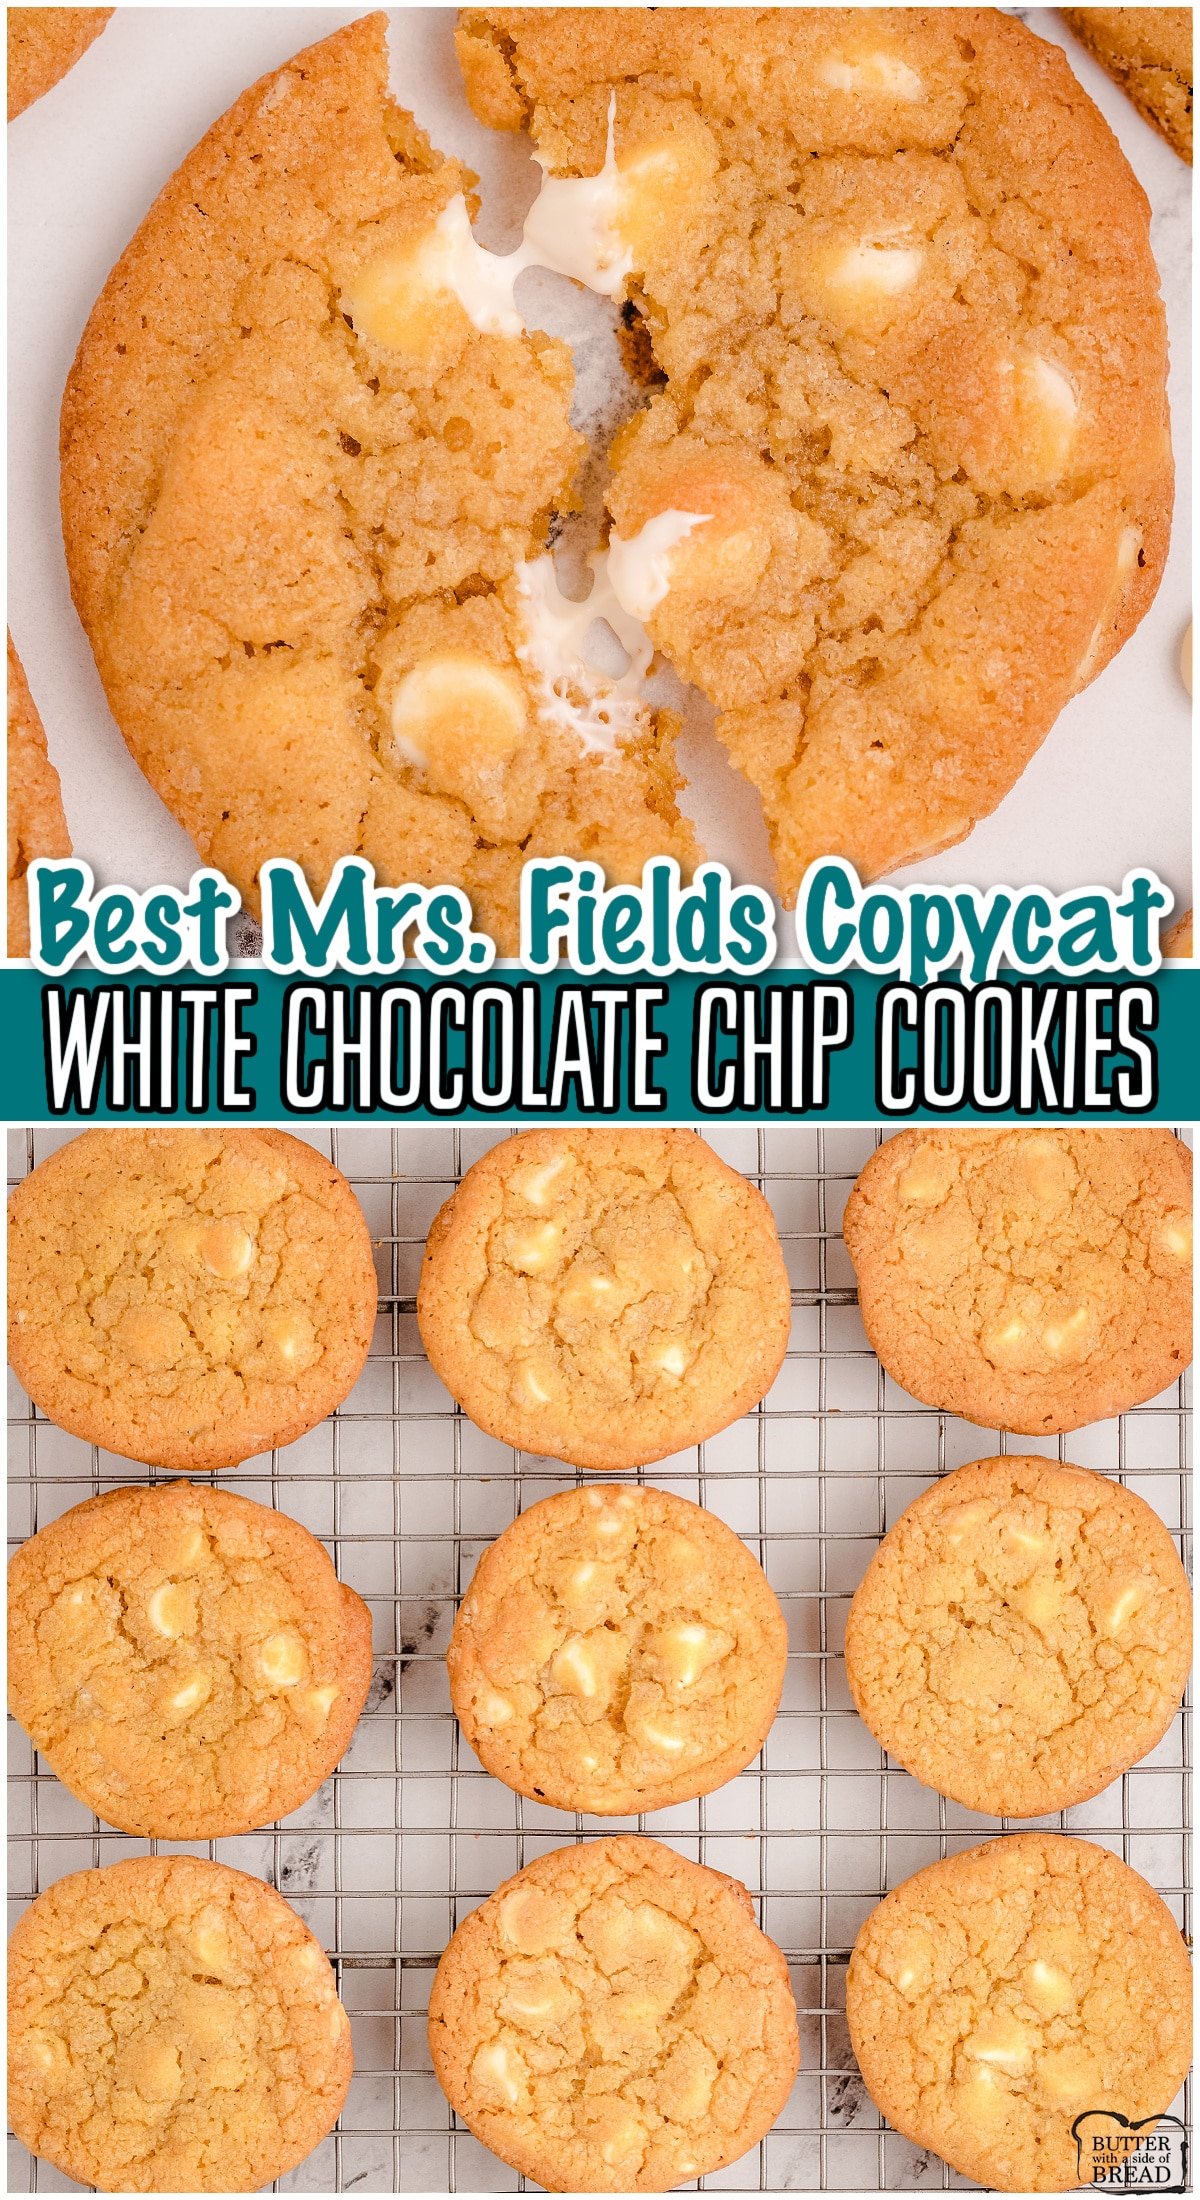 Mrs. Fields White Chocolate Chip Cookies are the perfect copycat recipe loaded with white chocolate chips & incredible flavor! White chocolate chip cookies with crisp buttery edges & soft, chewy centers.